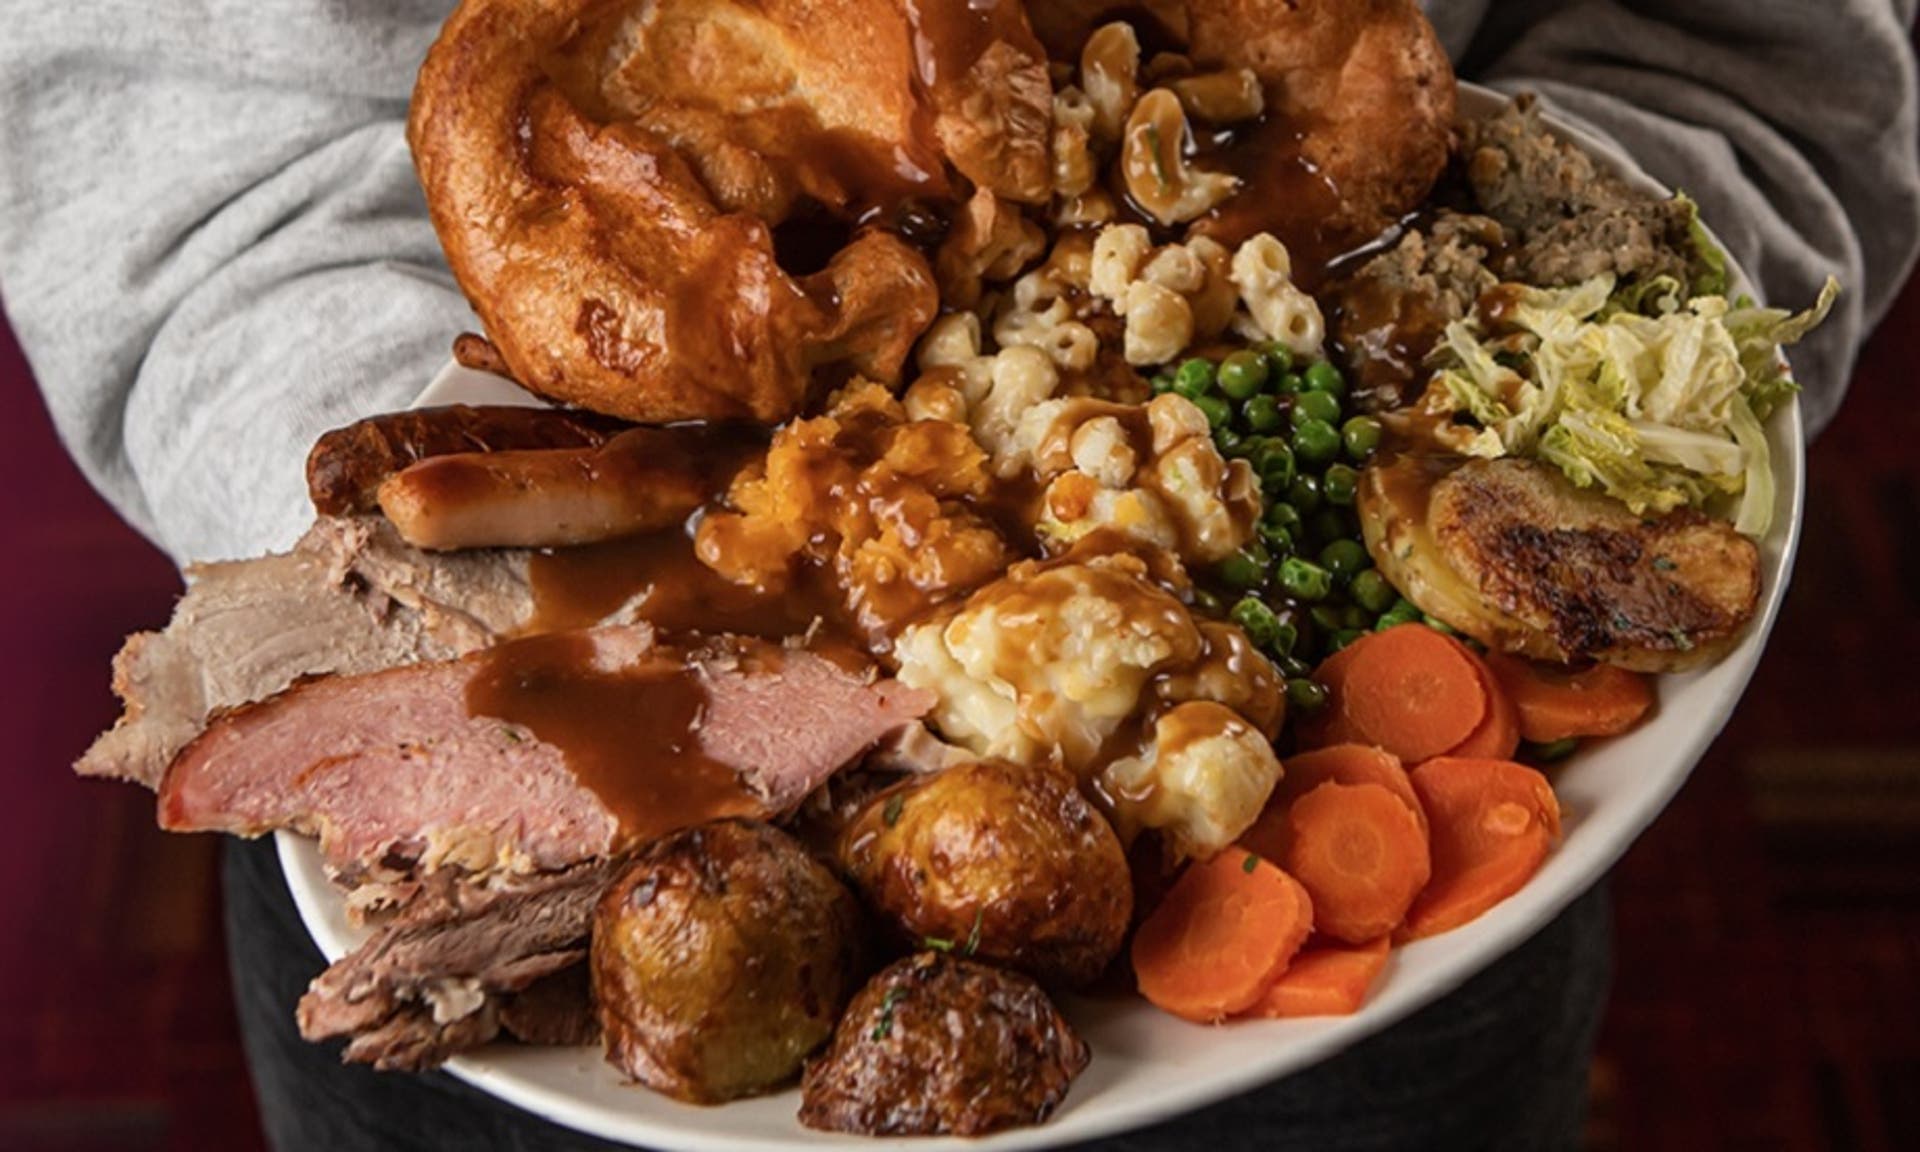  A picture of a Toby Carvery roast featuring beef, gammon, roast potatoes, mash potatoes, yorkshire puddings, sausages, mac and cheese and vegetables served on a plate with gravy held by someone wearing a grey jumper. 